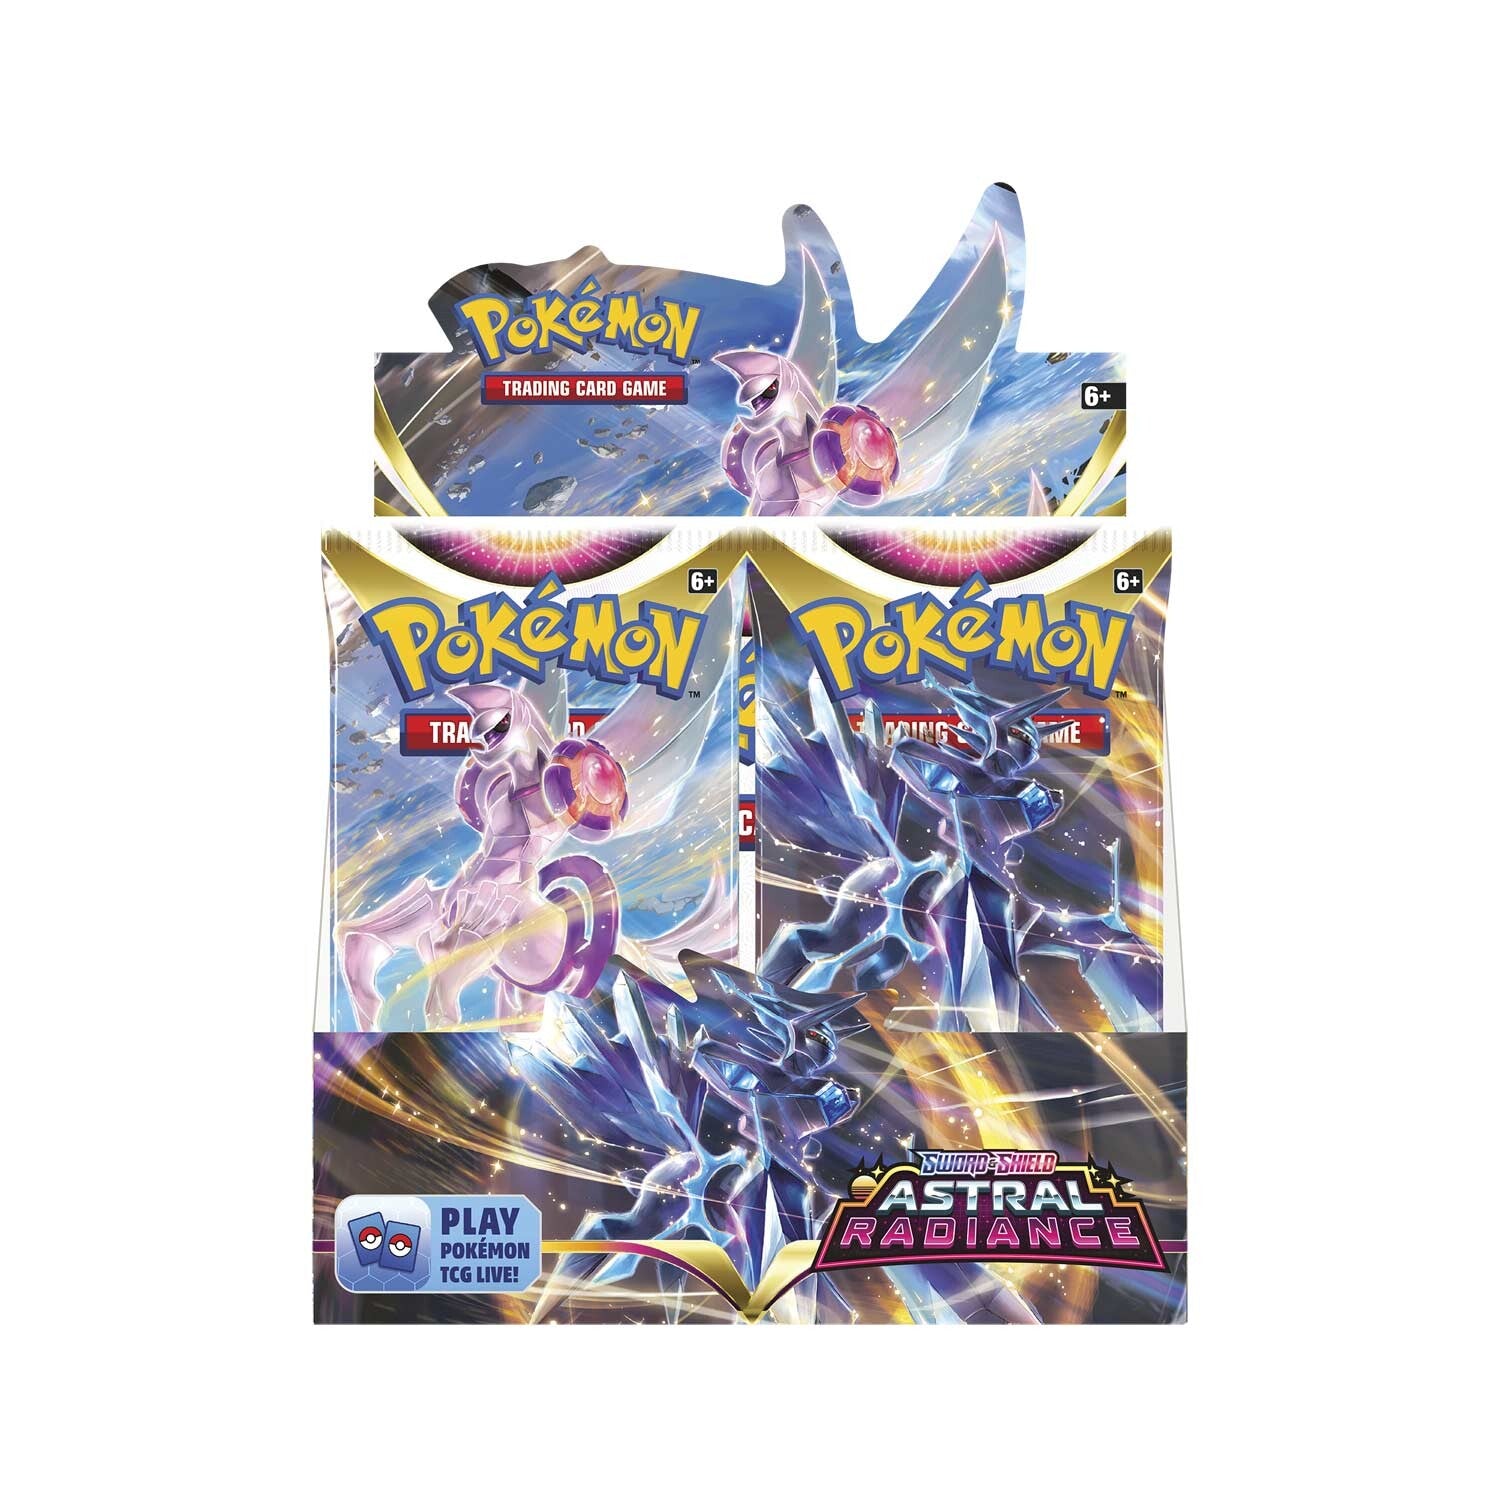 Pokémon Trading Card Game - Sword & Shield: Astral Radiance - Booster Box | Viridian Forest